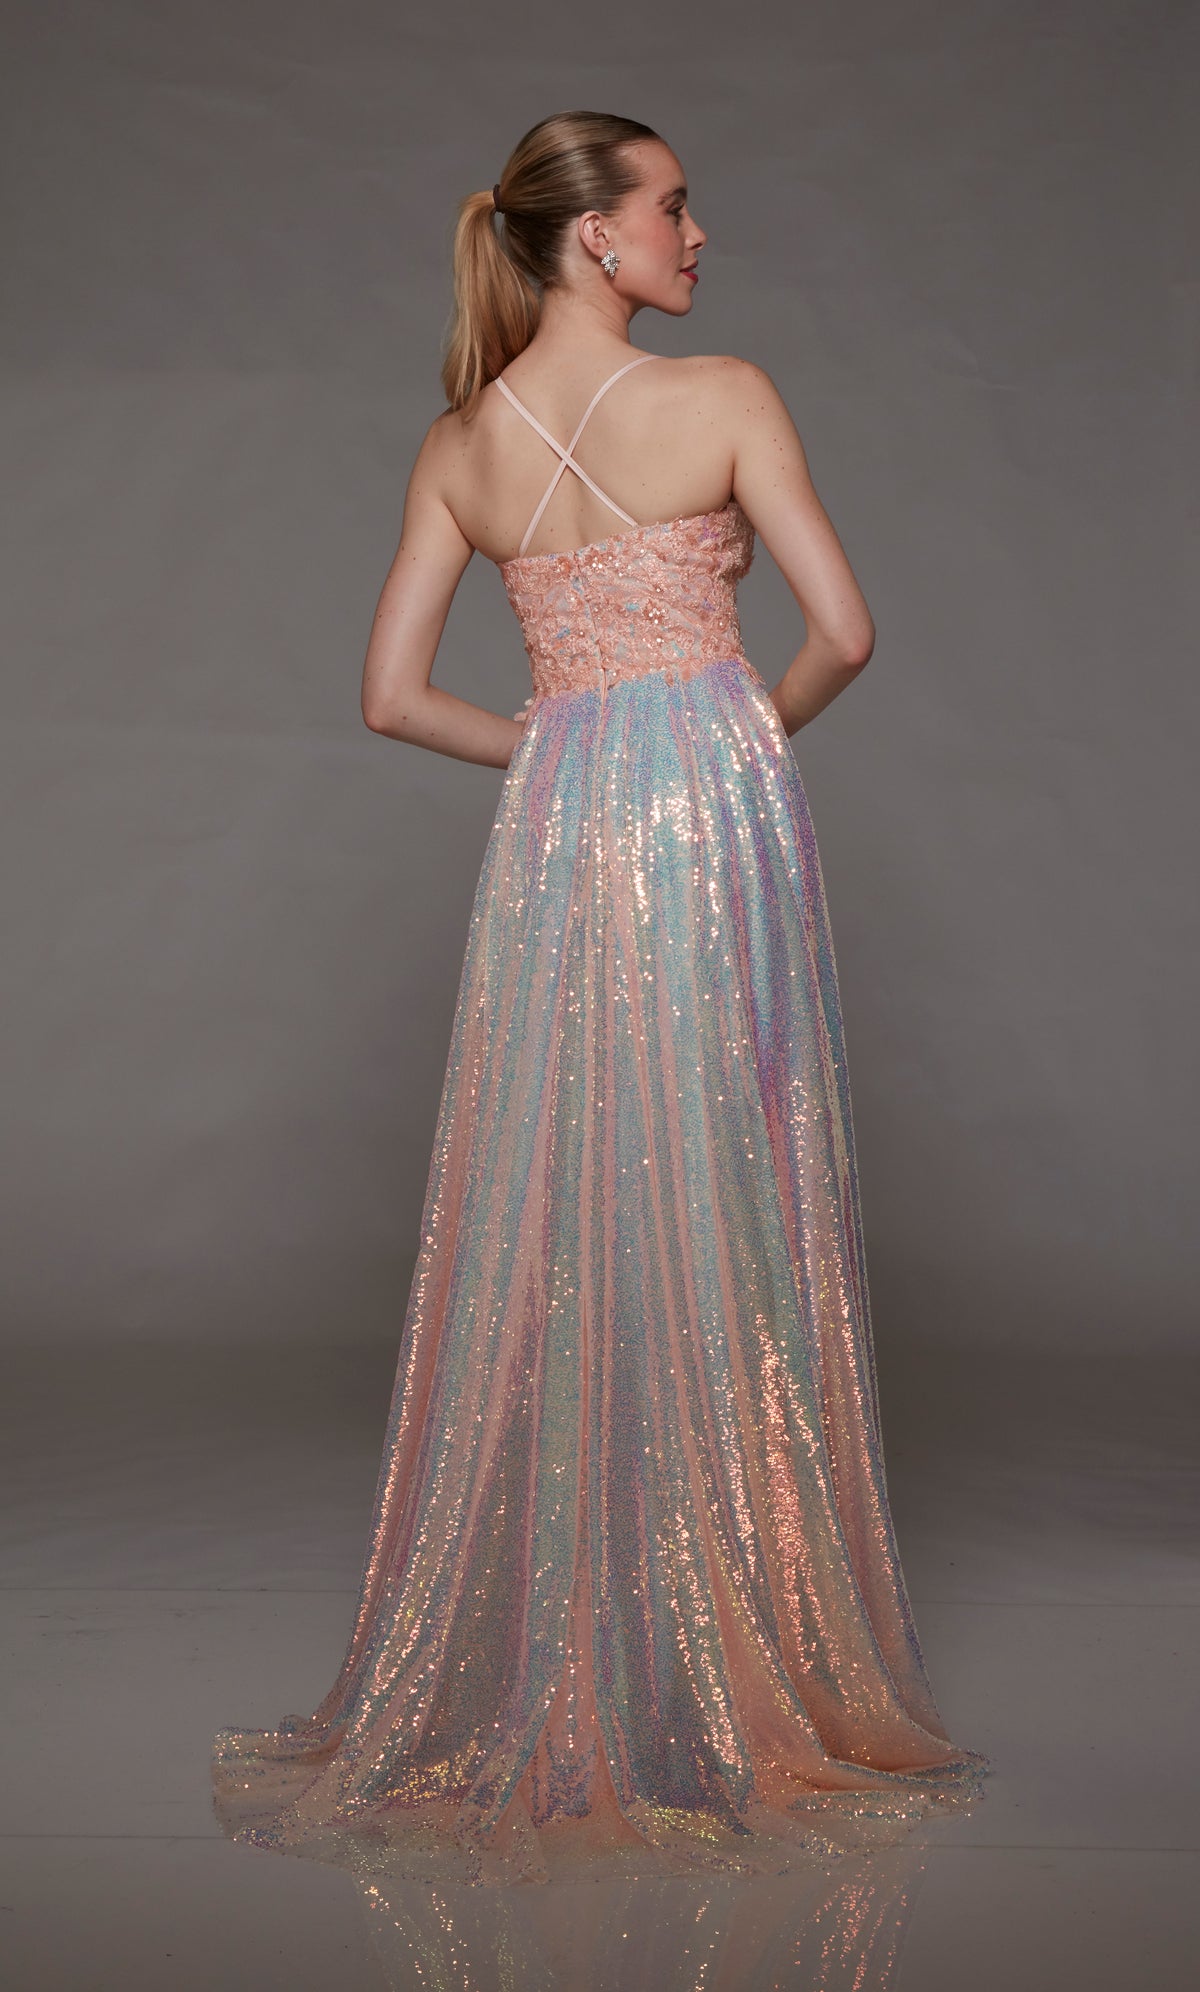 Iridescent pink opal sequin designer prom dress with an plunging neckline, floral lace appliques, high slit, zip-up back, crisscross straps, and an train for an captivating look.